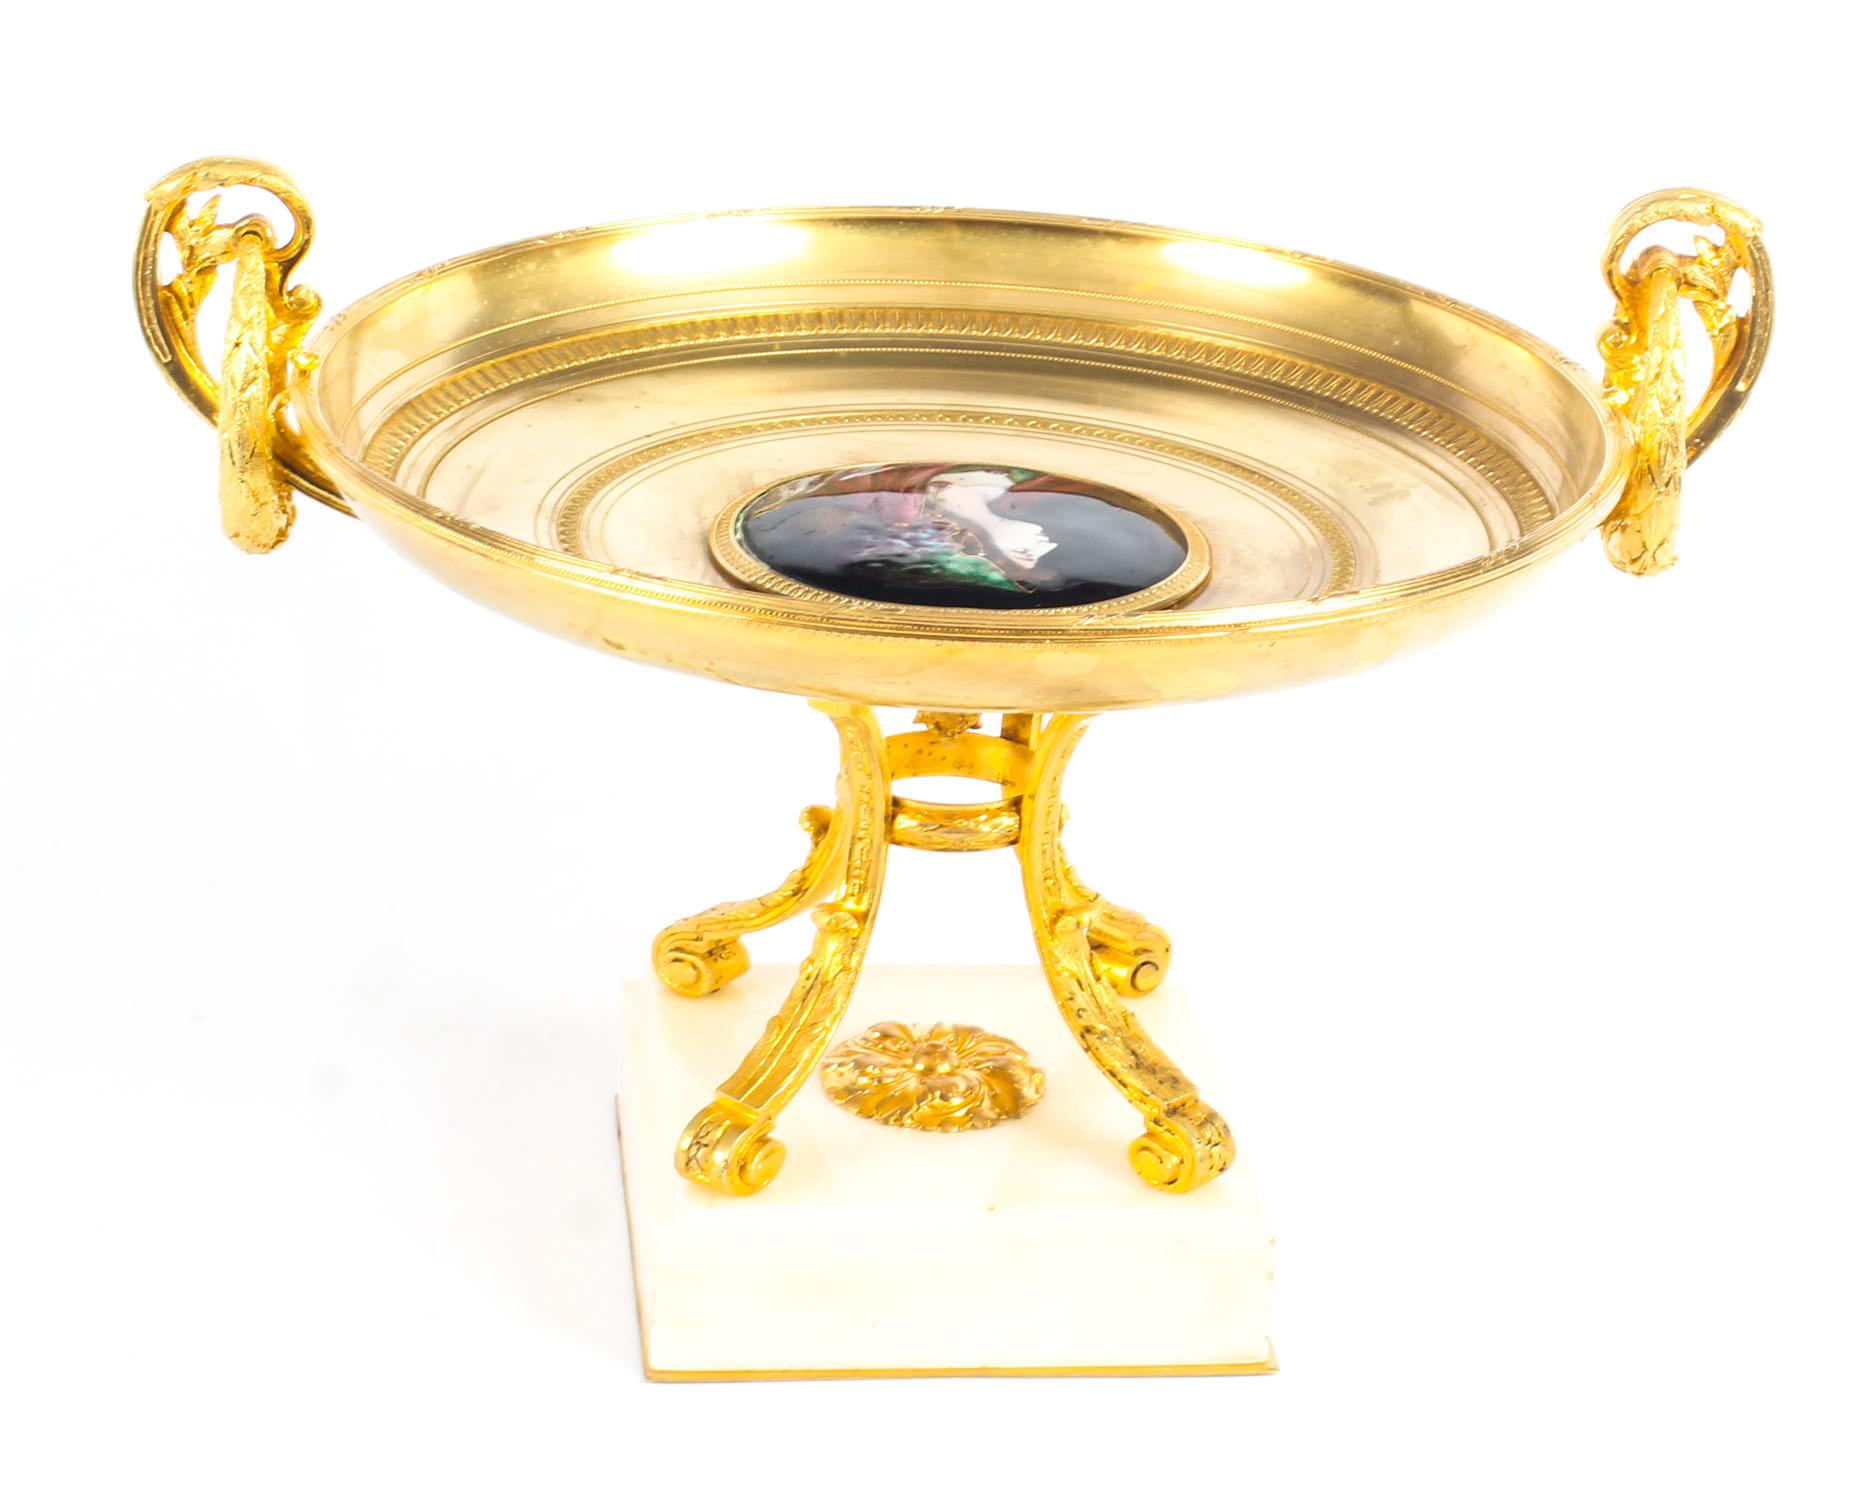 Antique French Ormolu Tazza with Limoges Enamel Plaque, 19th Century For Sale 5